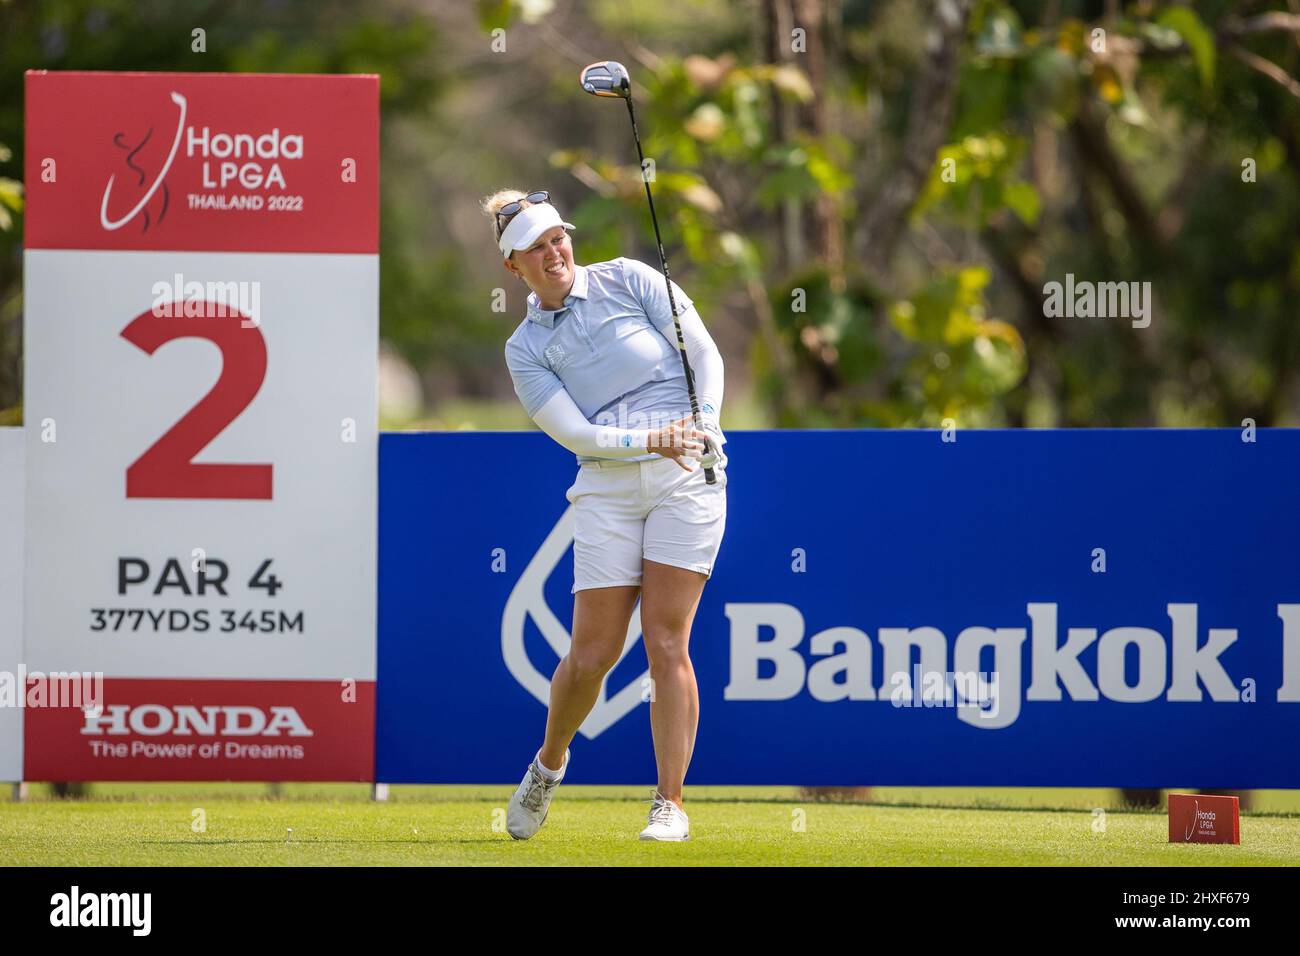 Pattaya Thailand - March 12:  Nanna Koerstz Madsen from Denmark during day 3 of The Honda LPGA Thailand at Siam Country Club Old Course on March 12, 2022 in Pattaya, Thailand (Photo by Peter van der Klooster/Orange Pictures) Stock Photo